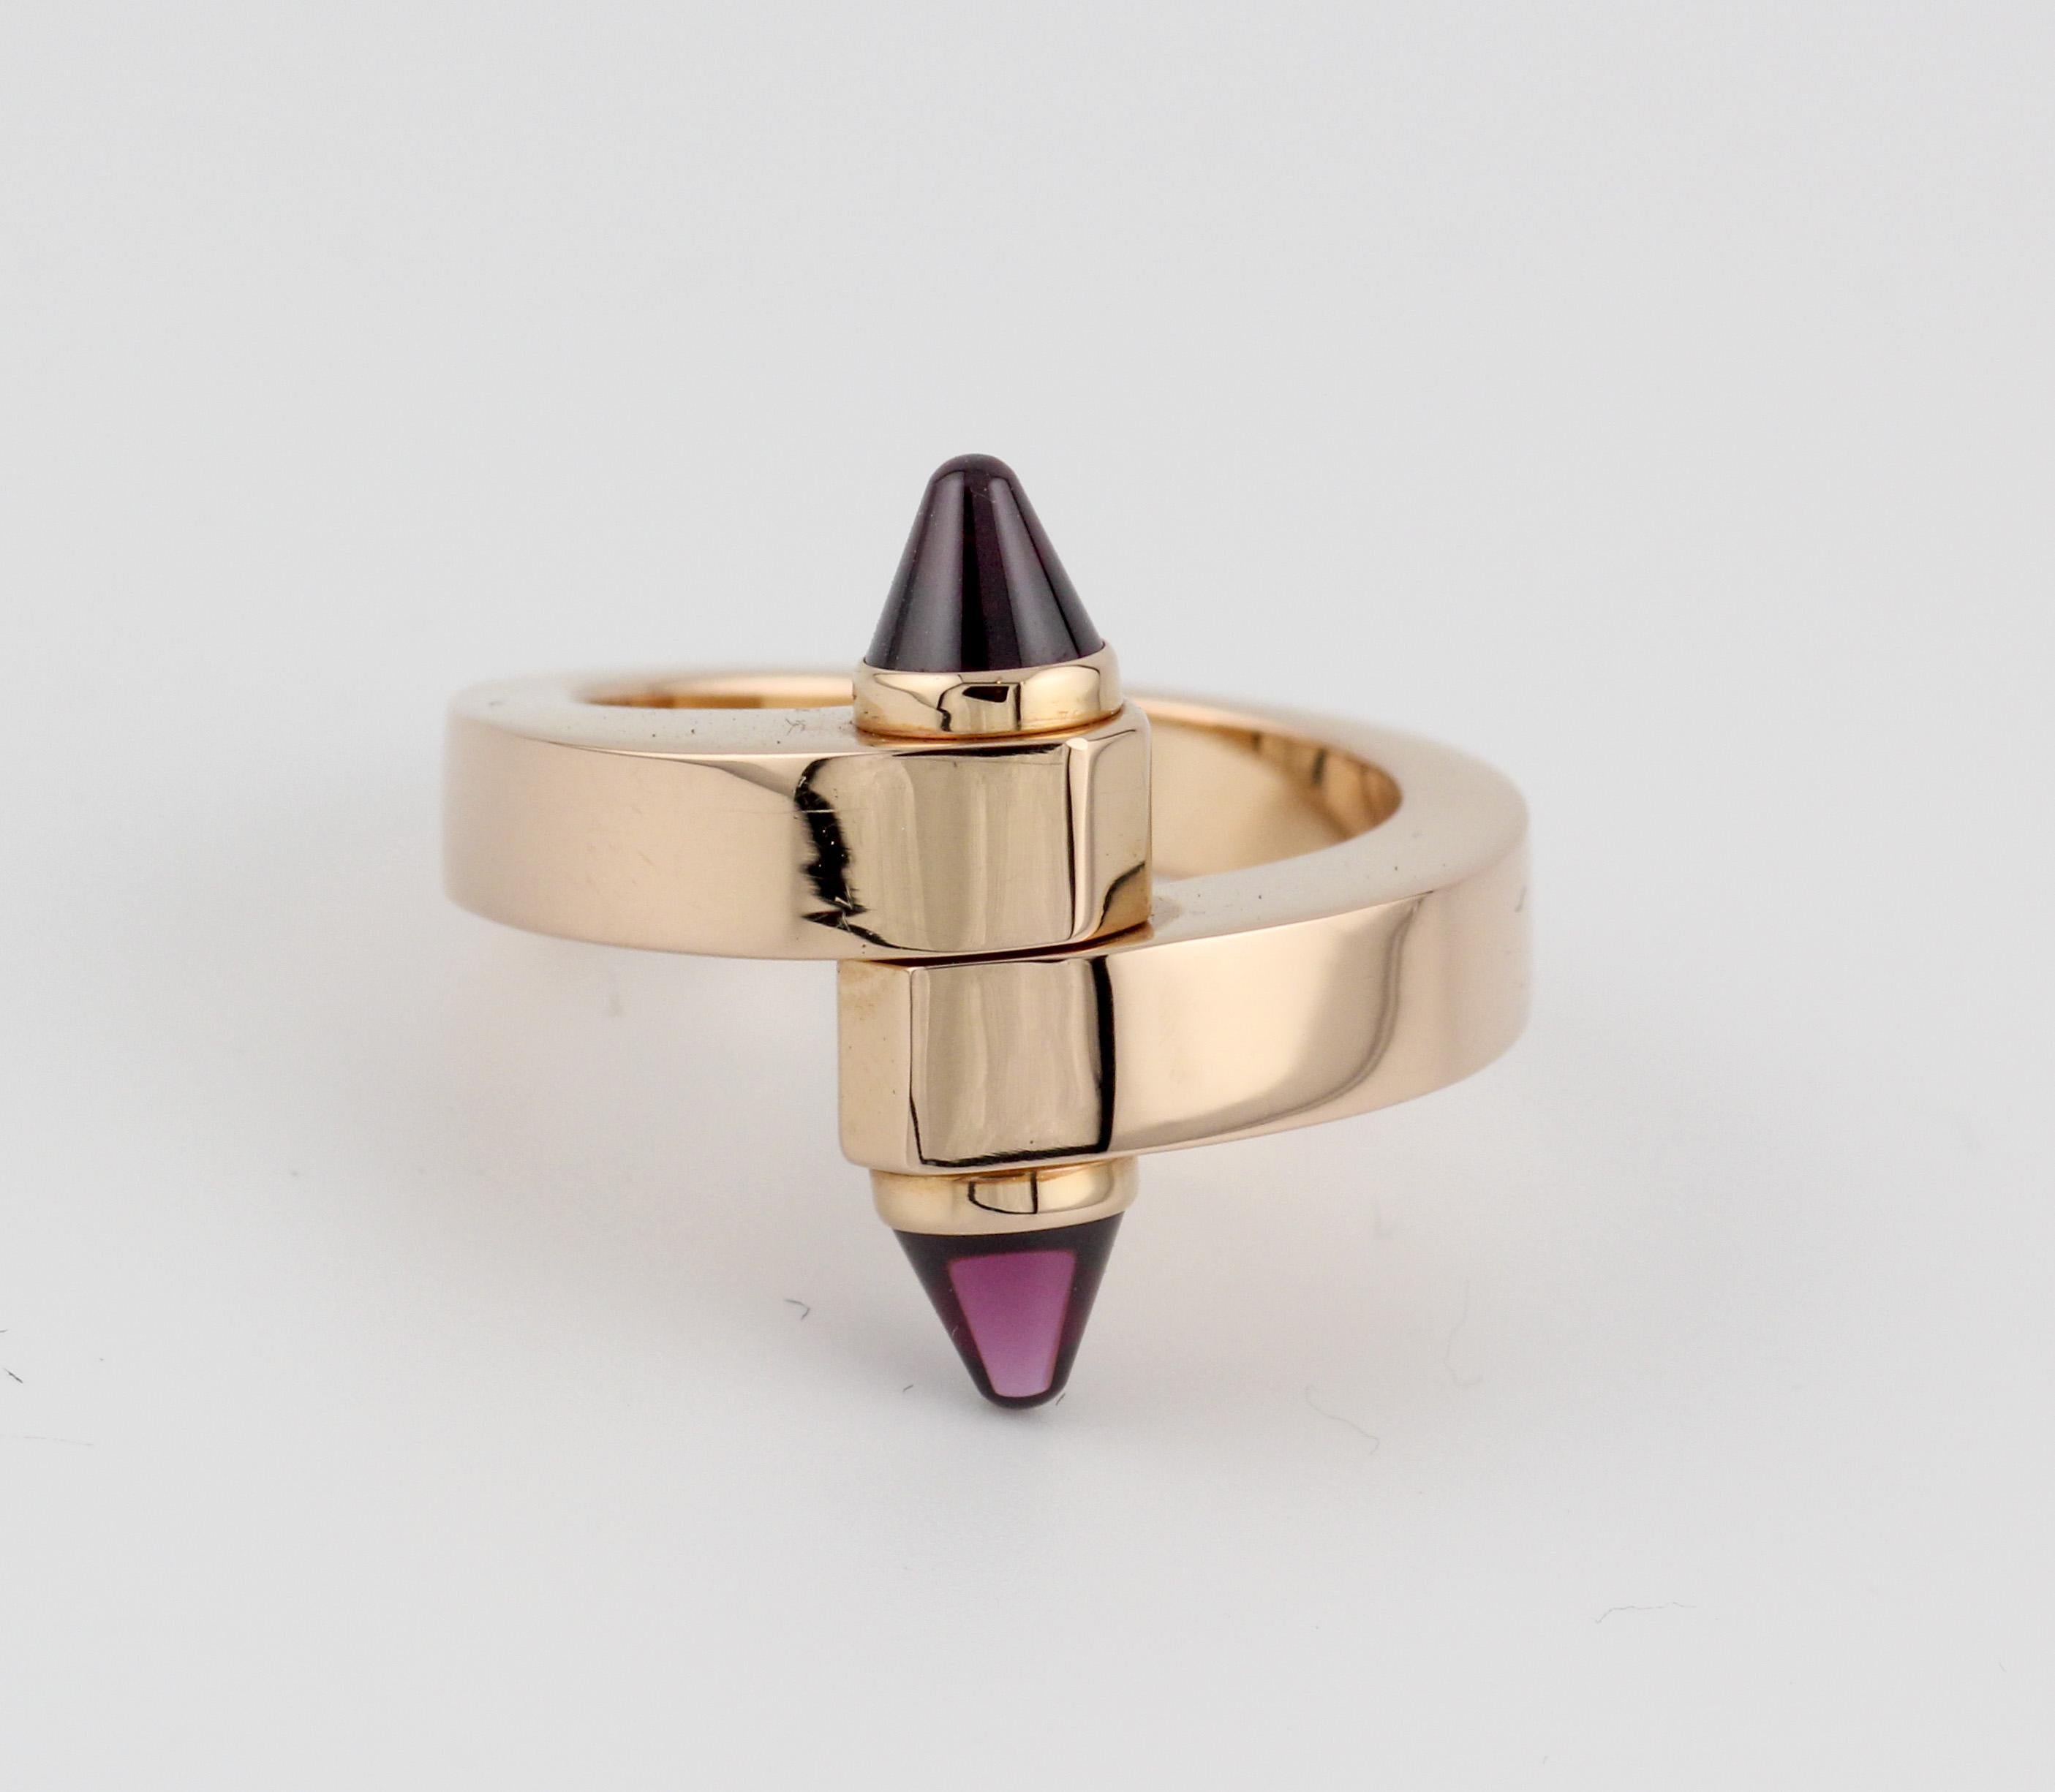 The Cartier Menotte 18k Rose Gold Tourmaline Bypass Ring is a masterpiece of fine jewelry that seamlessly combines elegance, innovation, and exceptional craftsmanship. This ring is a testament to Cartier's reputation for creating iconic and